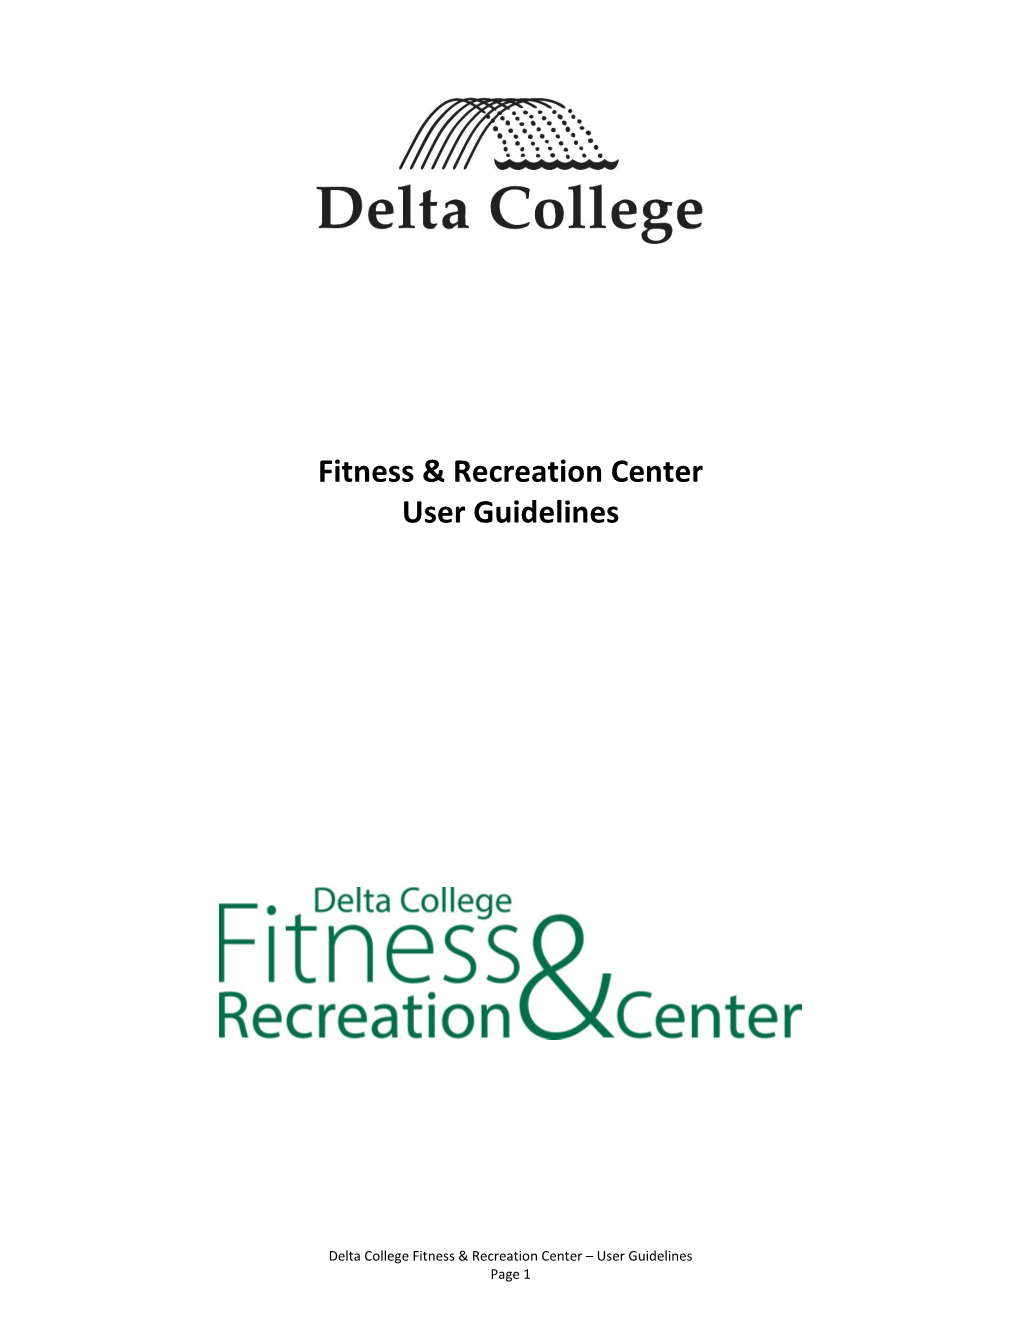 Delta College Fitness and Recreation Center User Guidelines